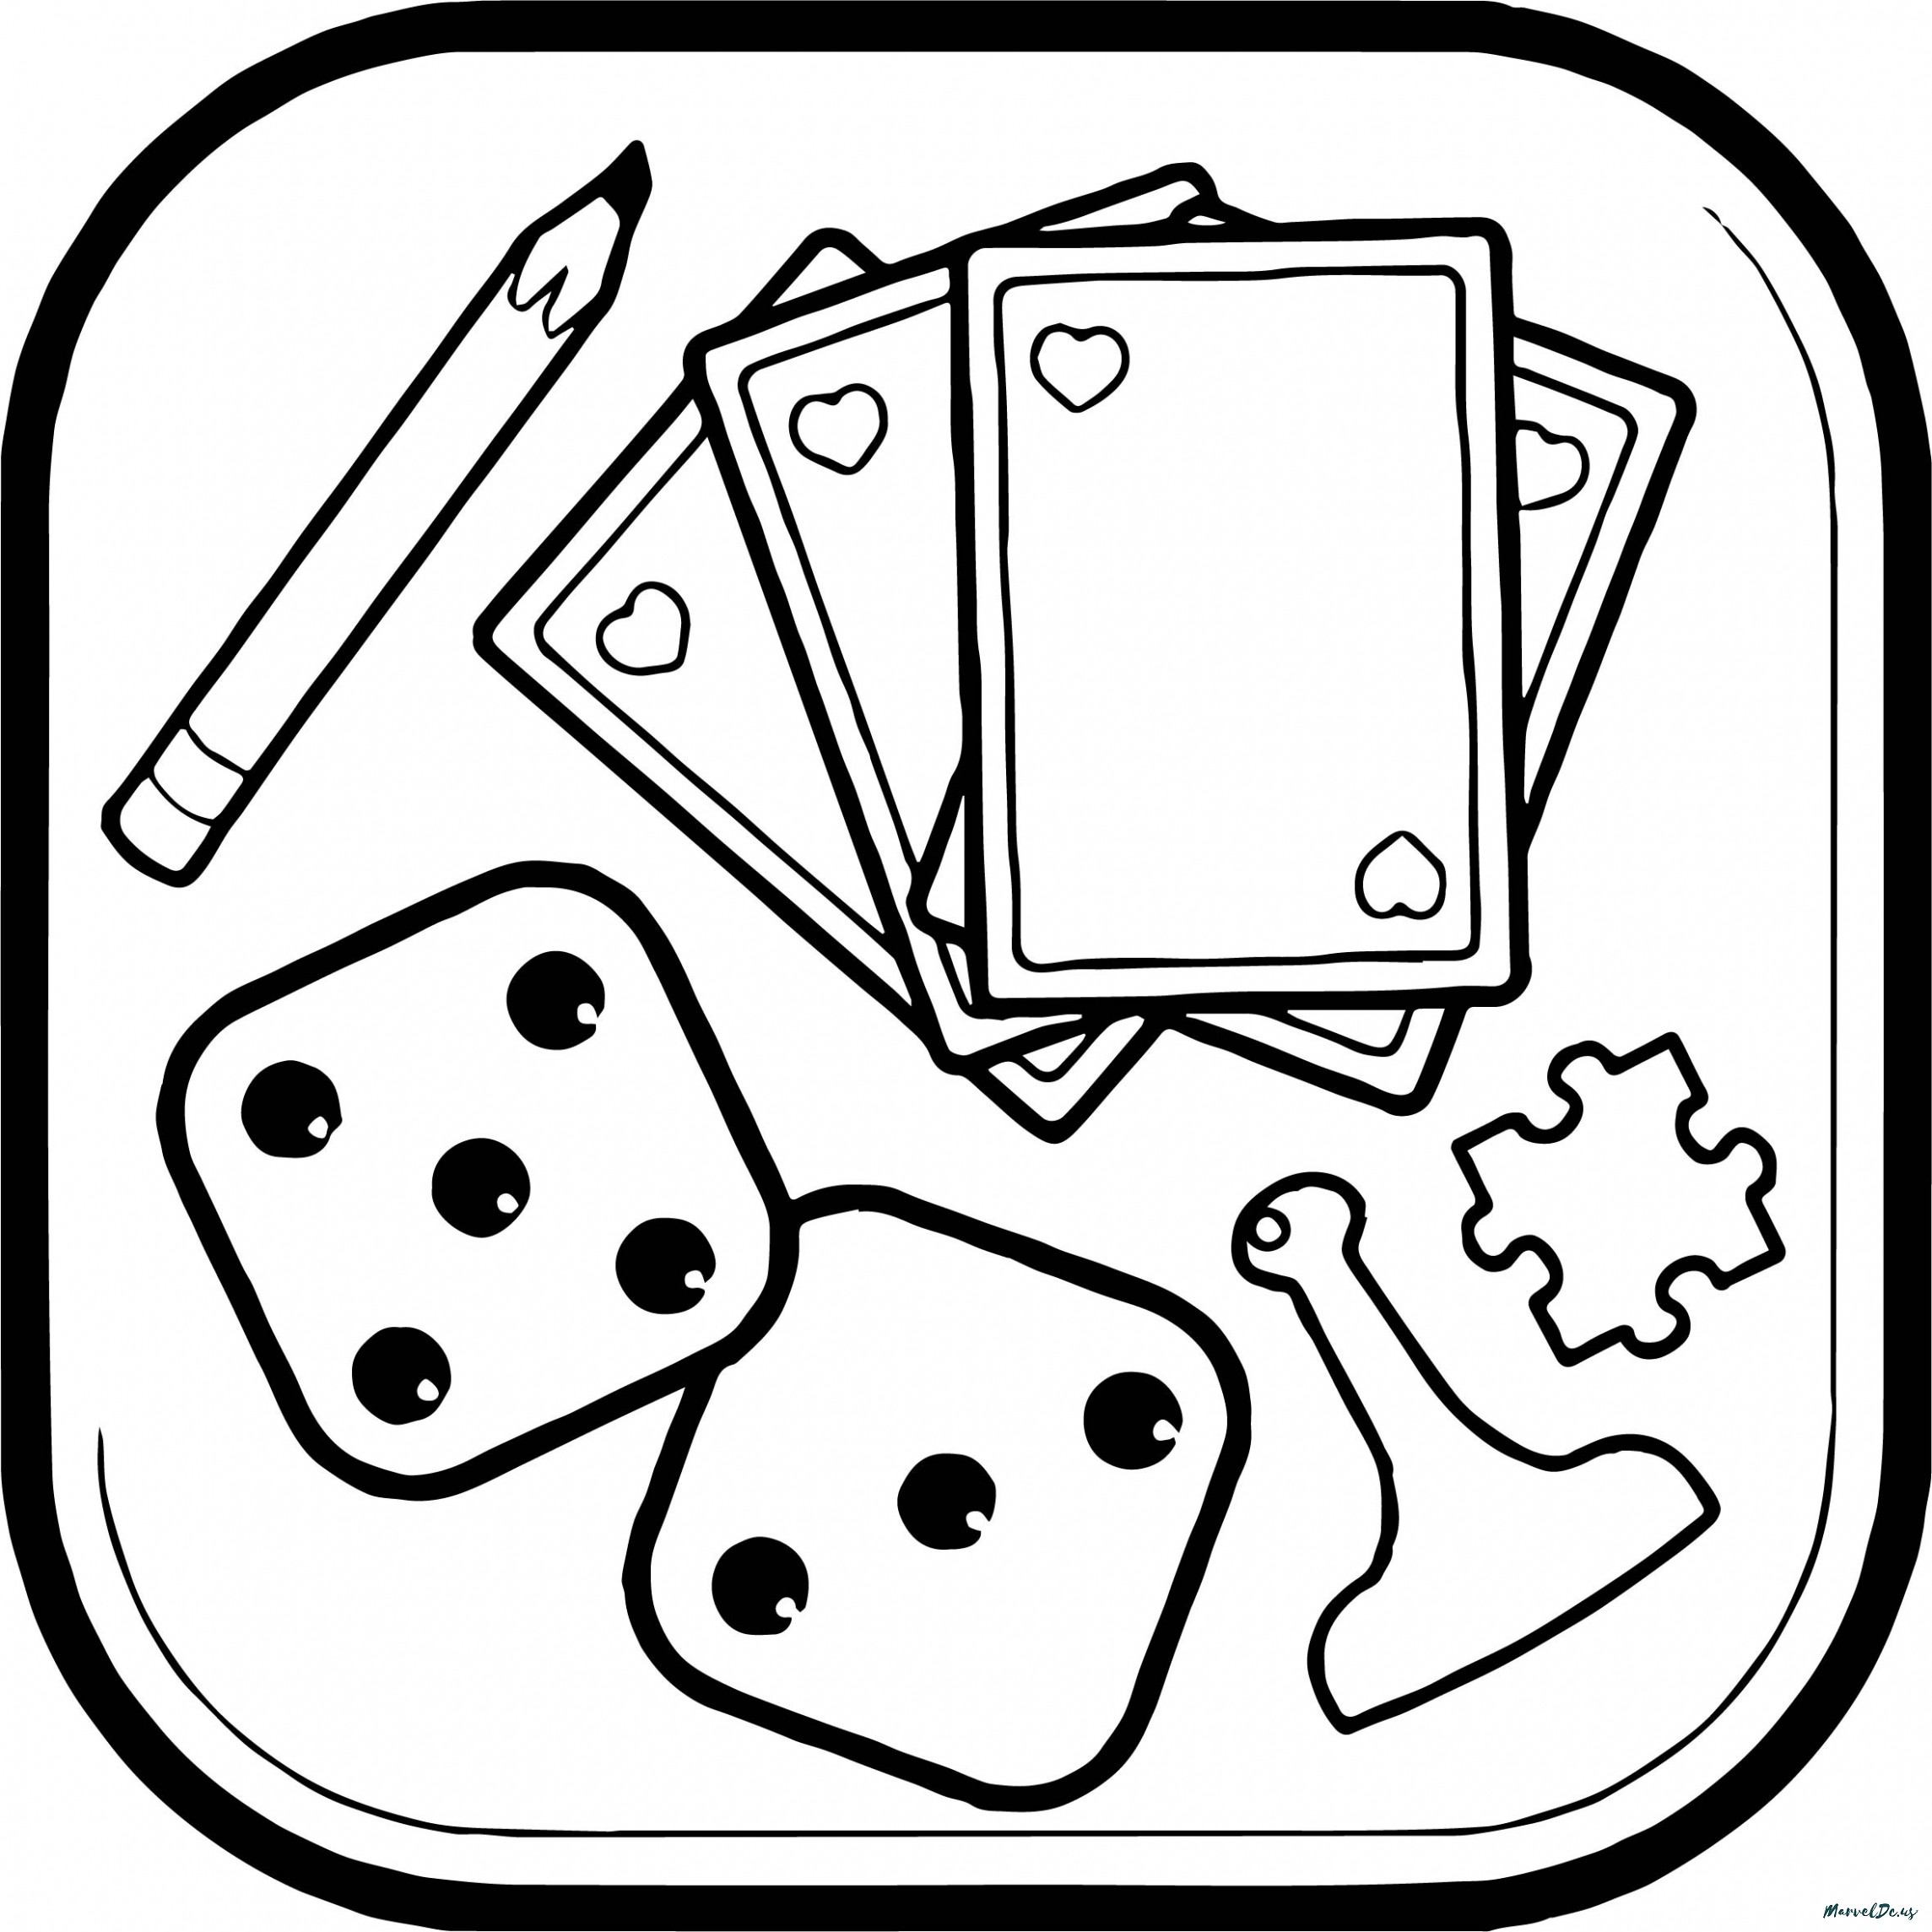 for mac download Coloring Games: Coloring Book & Painting